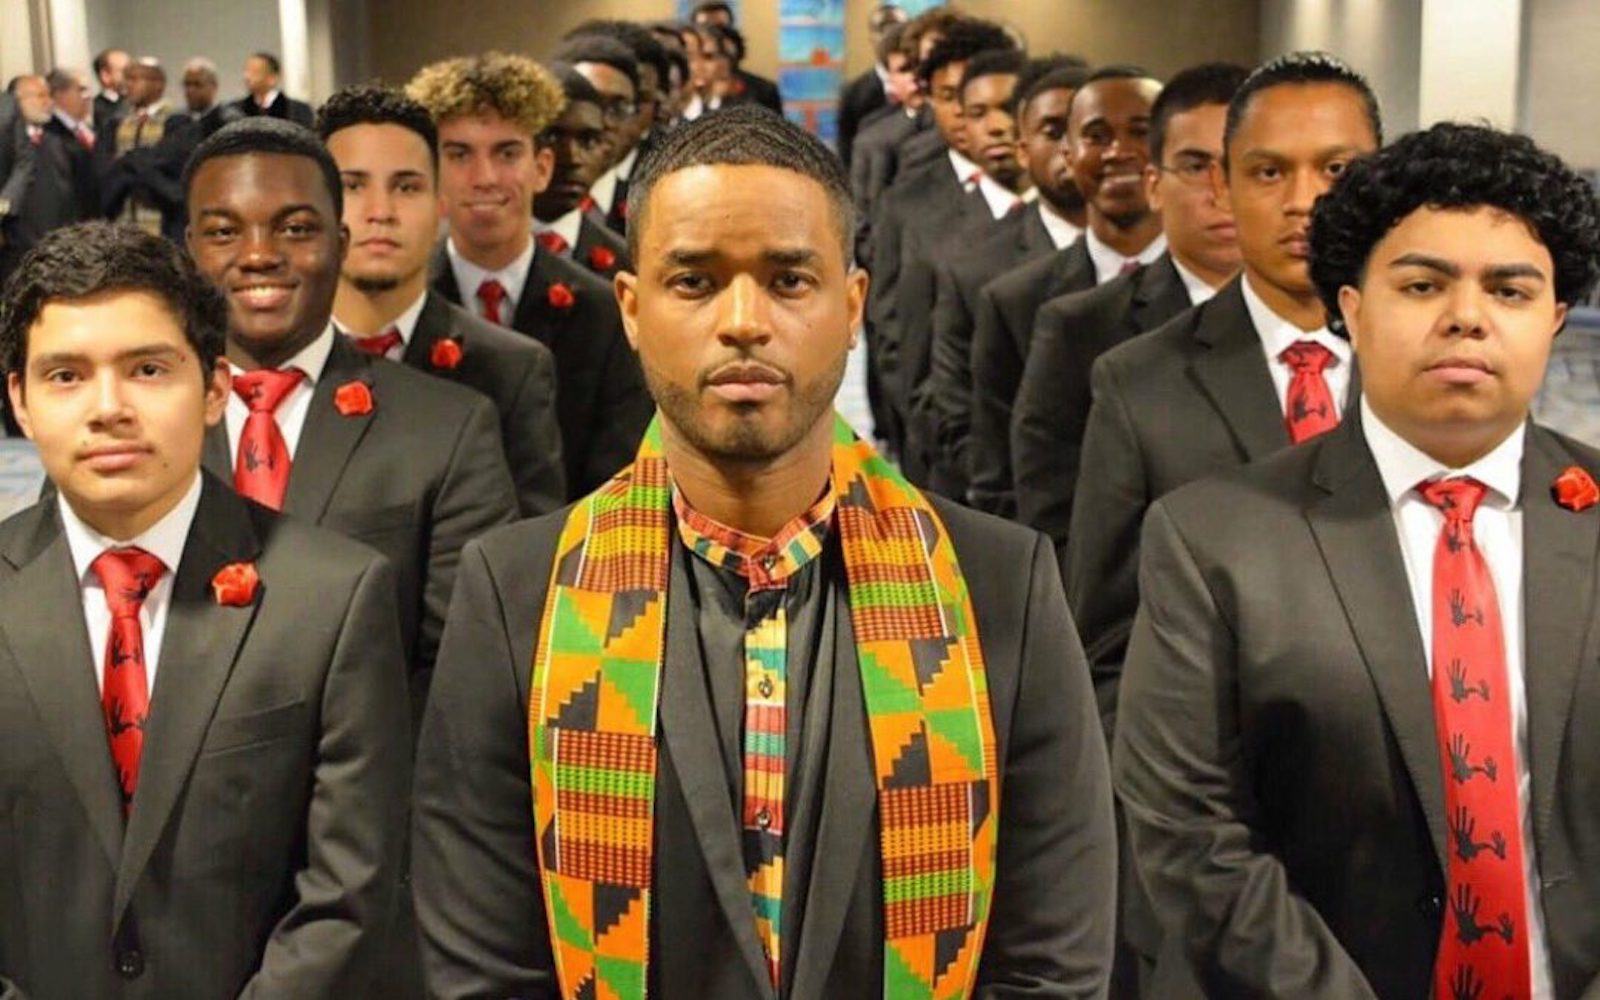 500 African American Male Role Models of Excellence, Larenz Tate, African American Community, Black Community, KOLUMN Magazine, KOLUMN, KINDR'D Magazine, KINDR'D, Willoughby Avenue, Wriit,